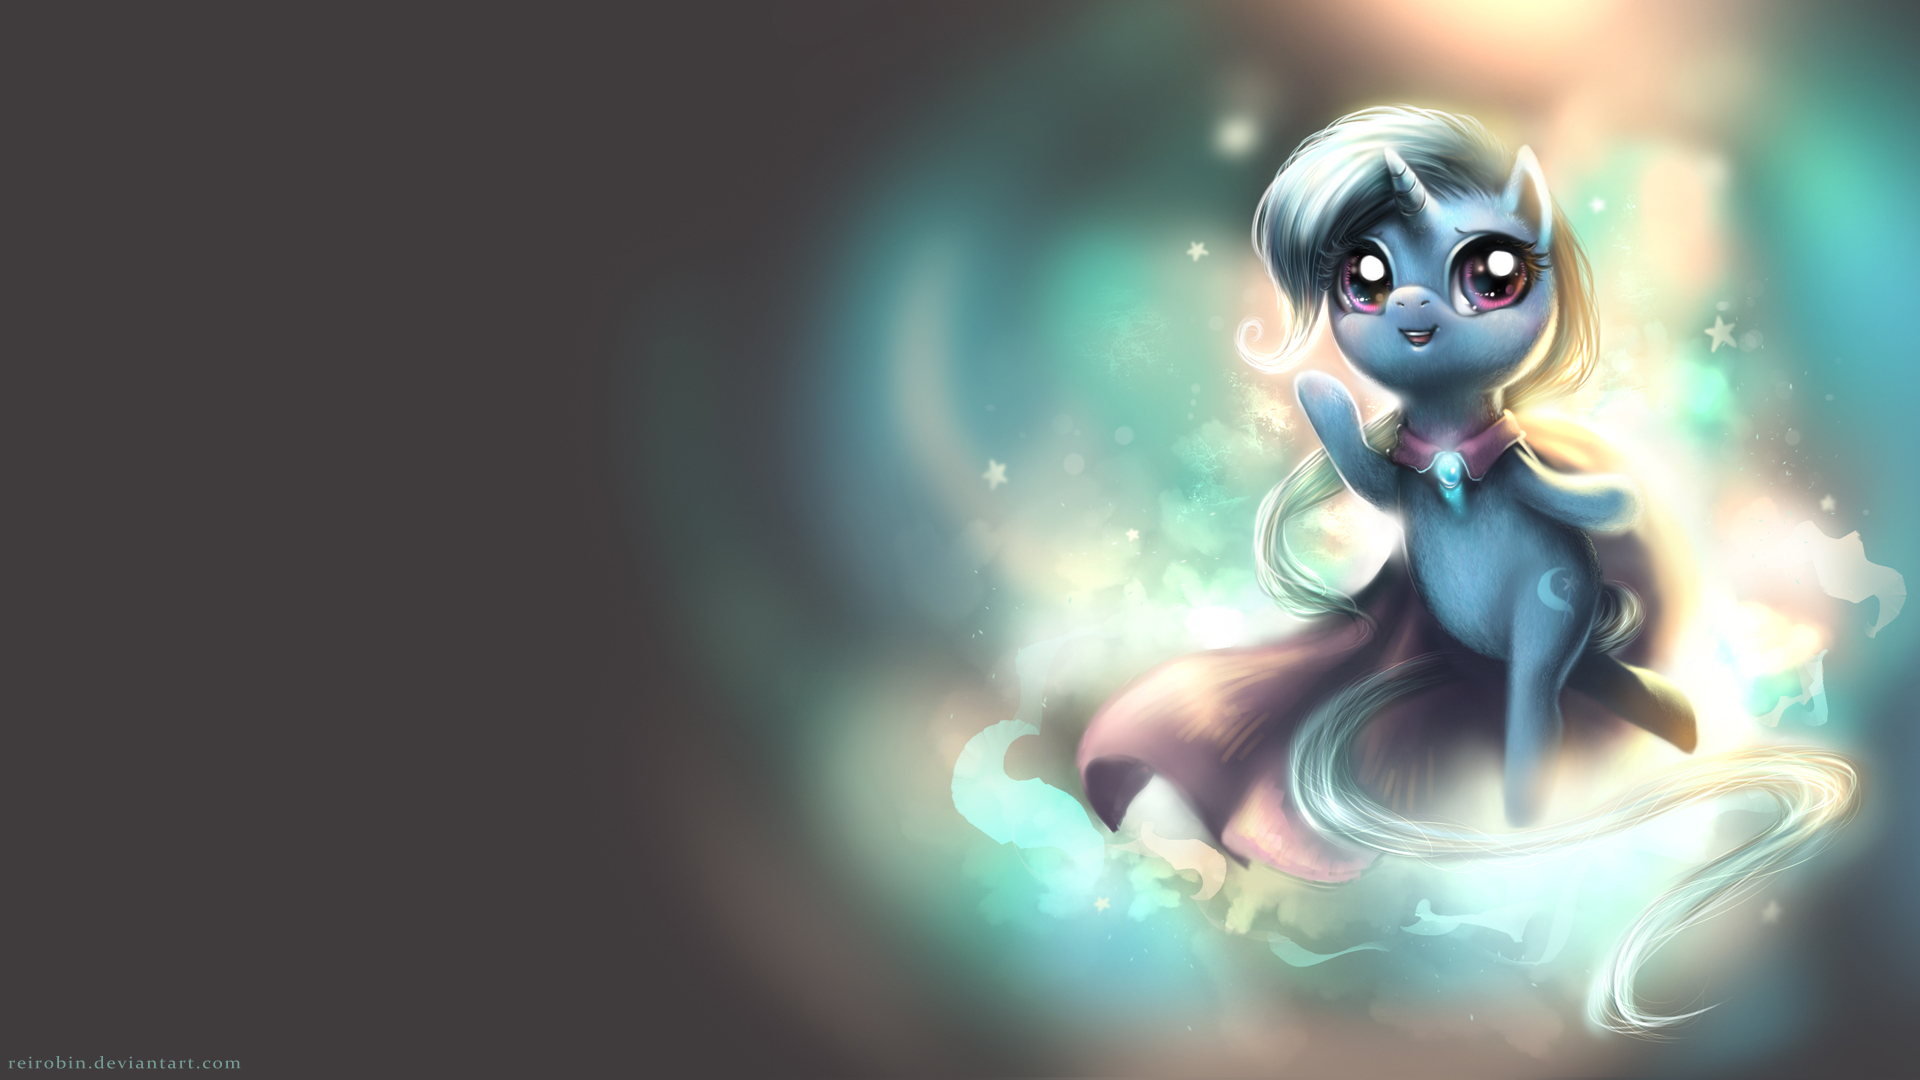 Wallpaper: The Great n' Apologetic Trixie Lulamoon by ReiRobin